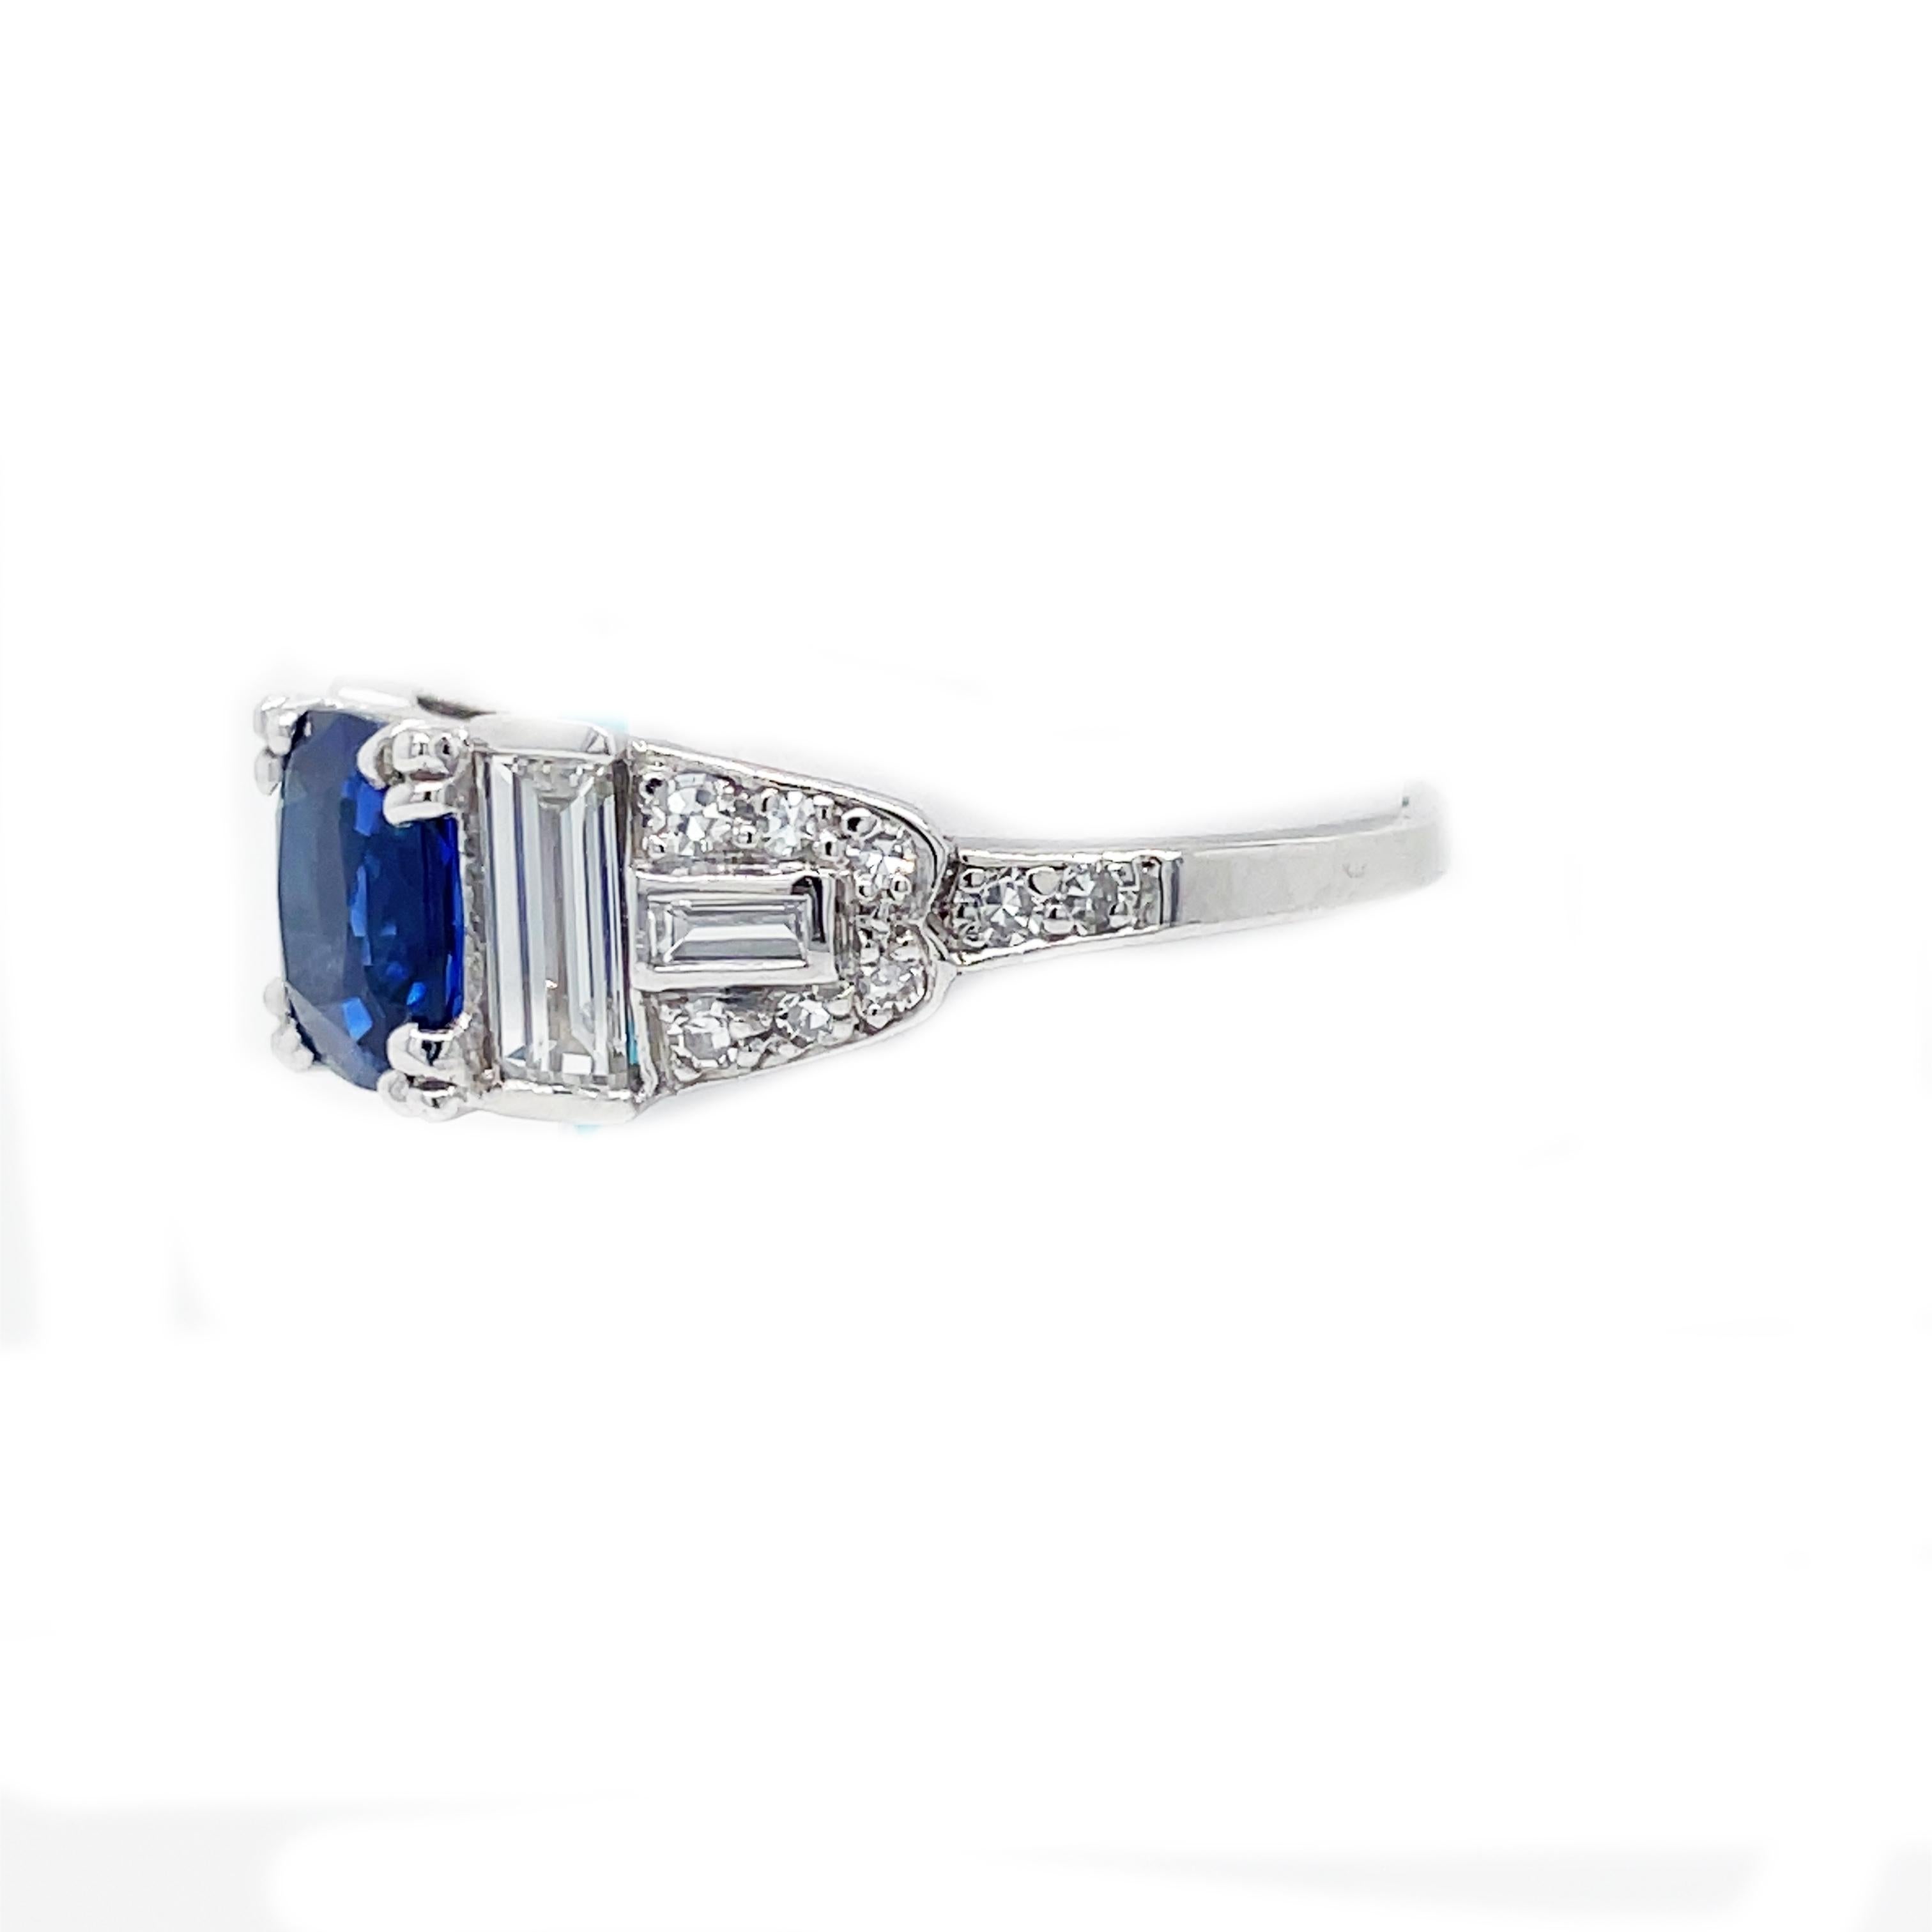 This is an absolutely killer 1940's Art Deco Style ring set in Platinum that features stunning bright white diamonds and an almost 2.00 carat heat only vivid blue sapphire! This is a beautiful example of amazing Art Deco style jewelry! 

Can you